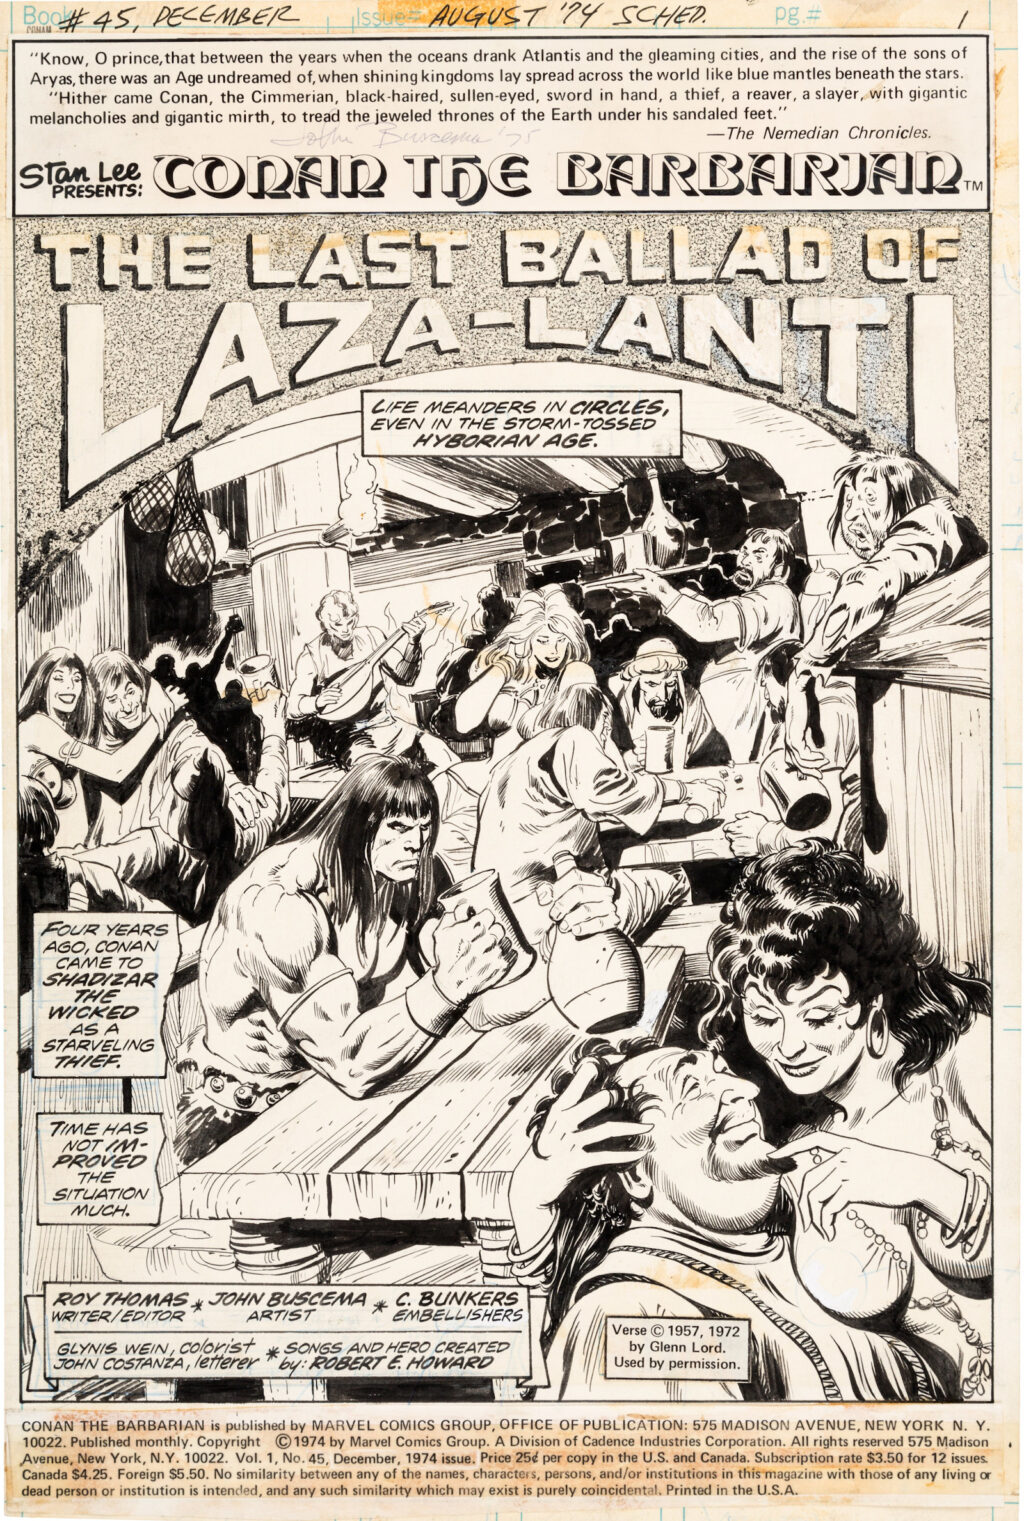 Conan the Barbarian issue 45 Page 1 by John Buscema and Crusty Bunkers